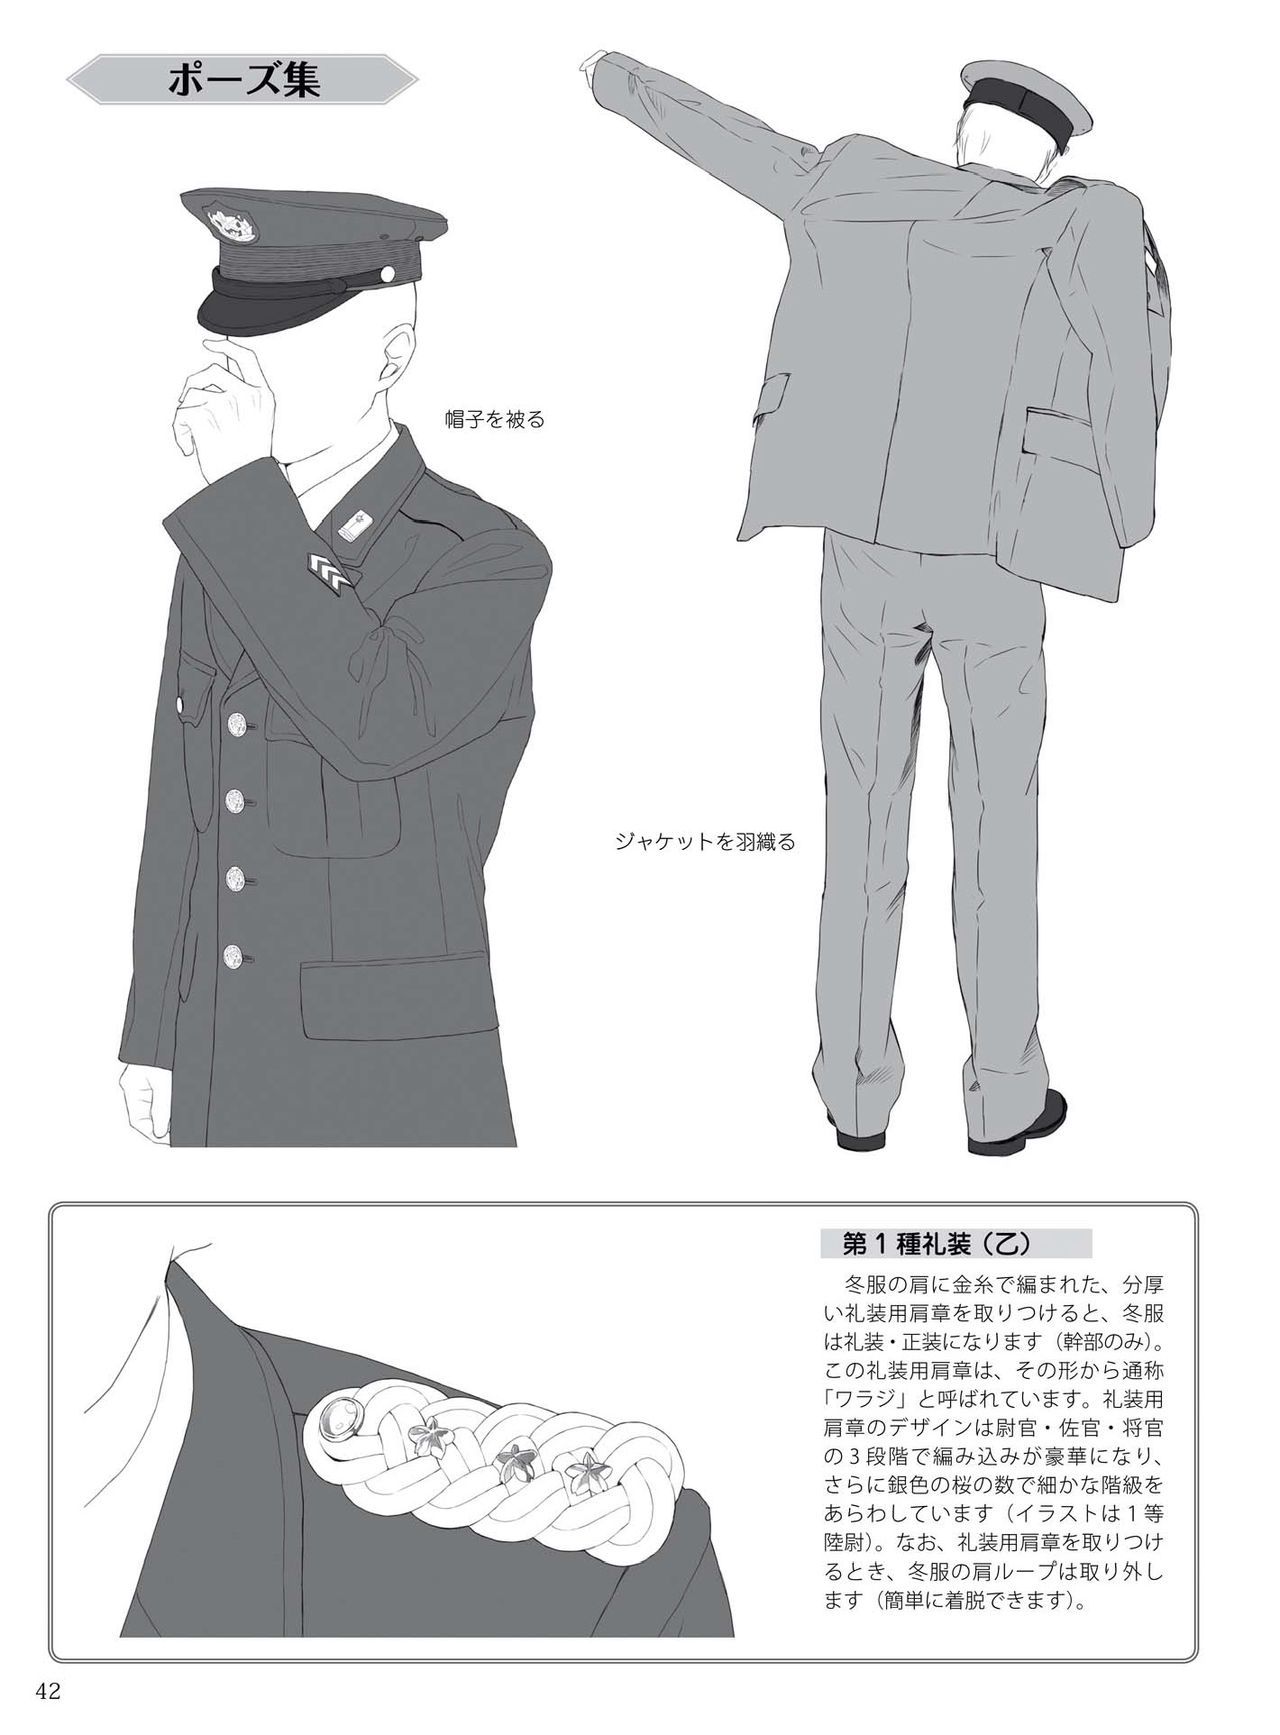 How to draw military uniforms and uniforms From Self-Defense Forces 軍服・制服の描き方 アメリカ軍・自衛隊の制服から戦闘服まで 45